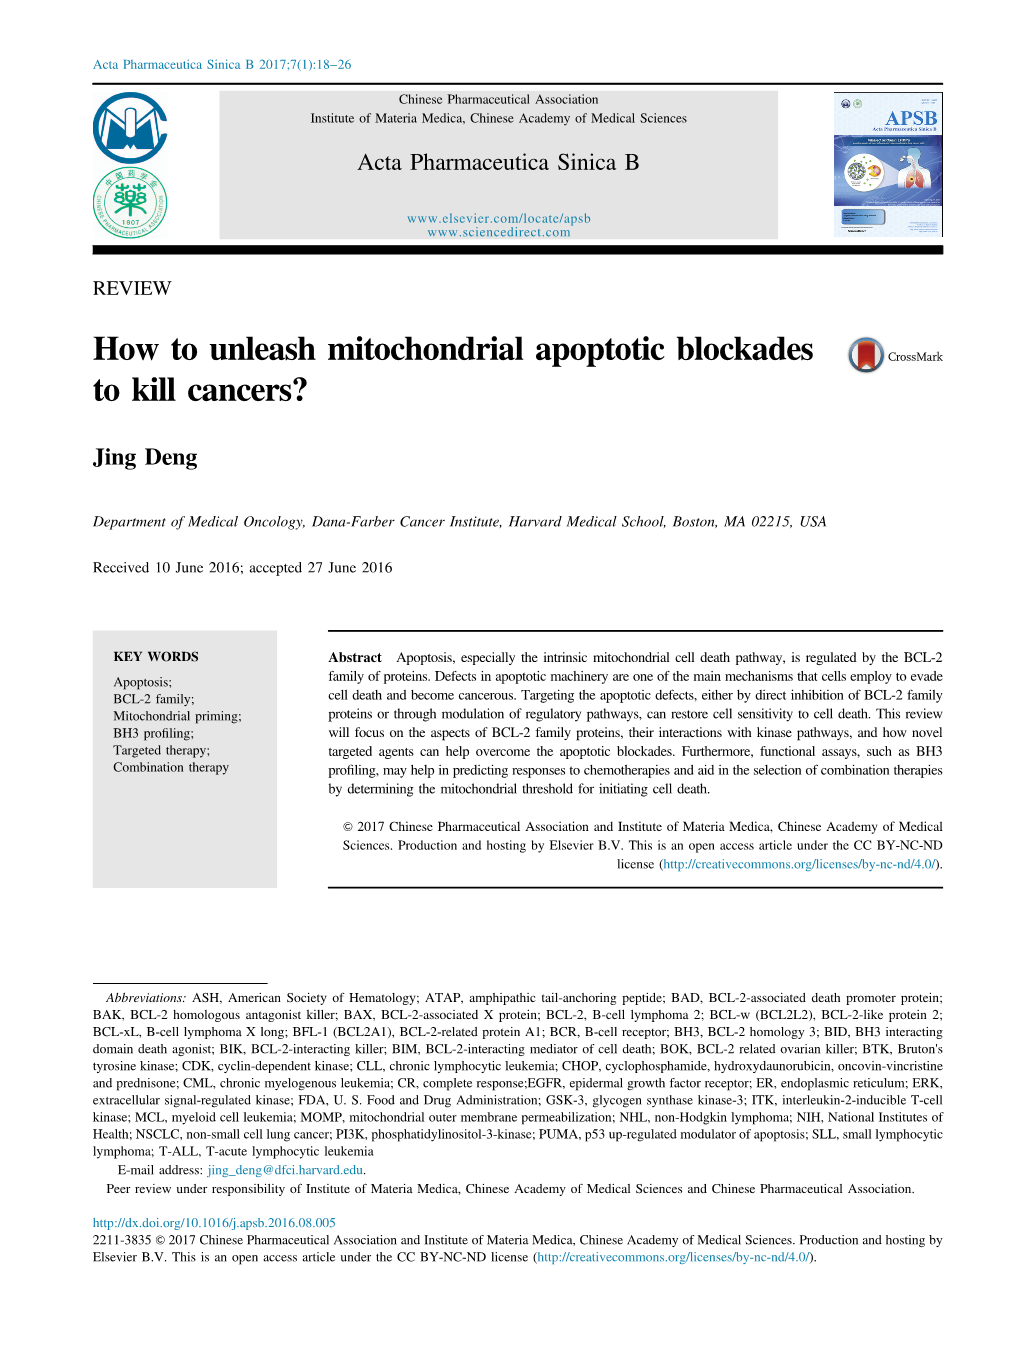 How to Unleash Mitochondrial Apoptotic Blockades to Kill Cancers?